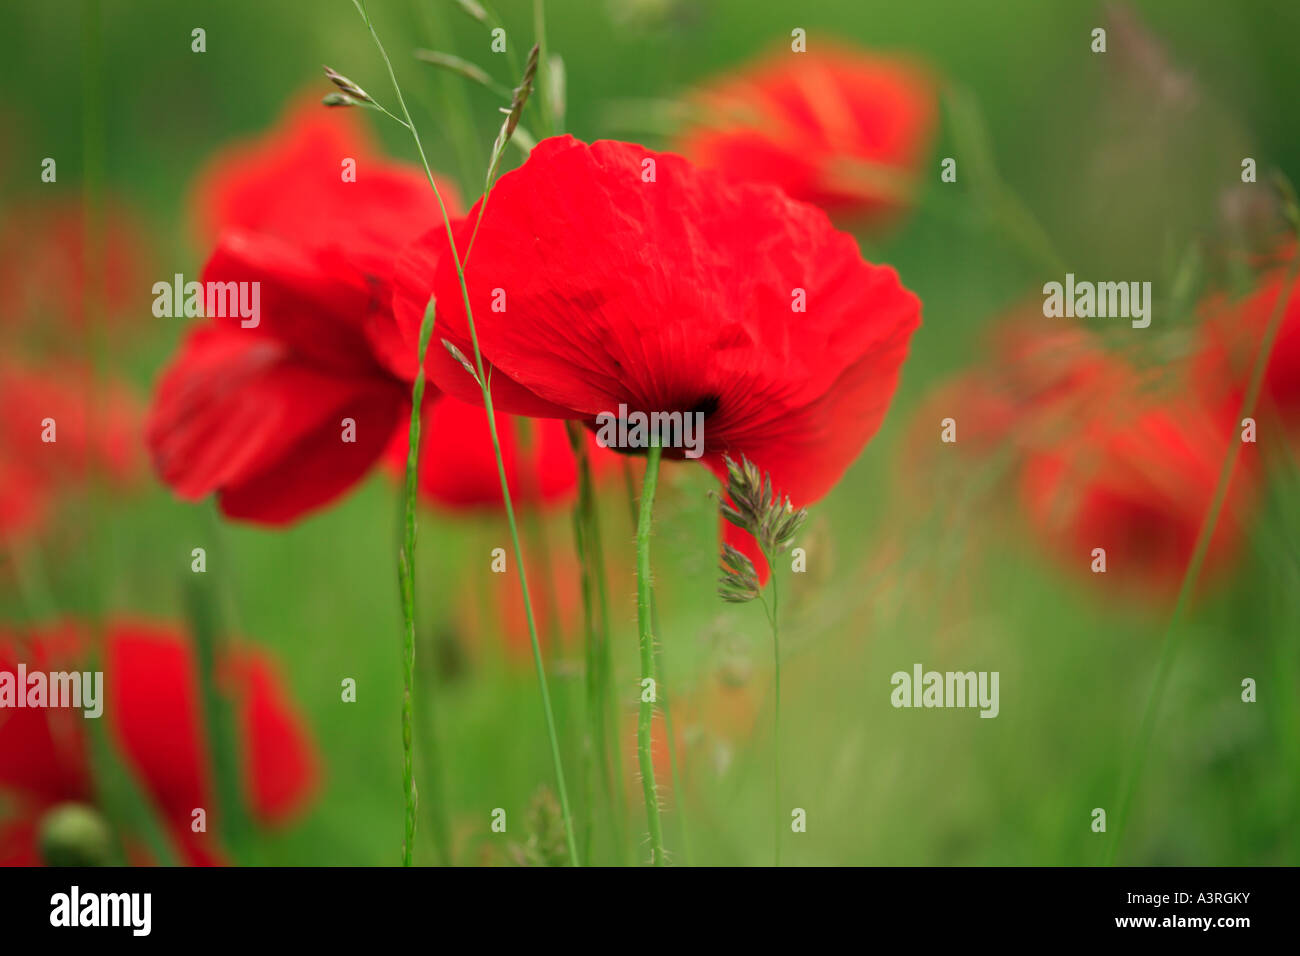 Field of vibrant red poppies blowing in the breeze Stock Photo - Alamy